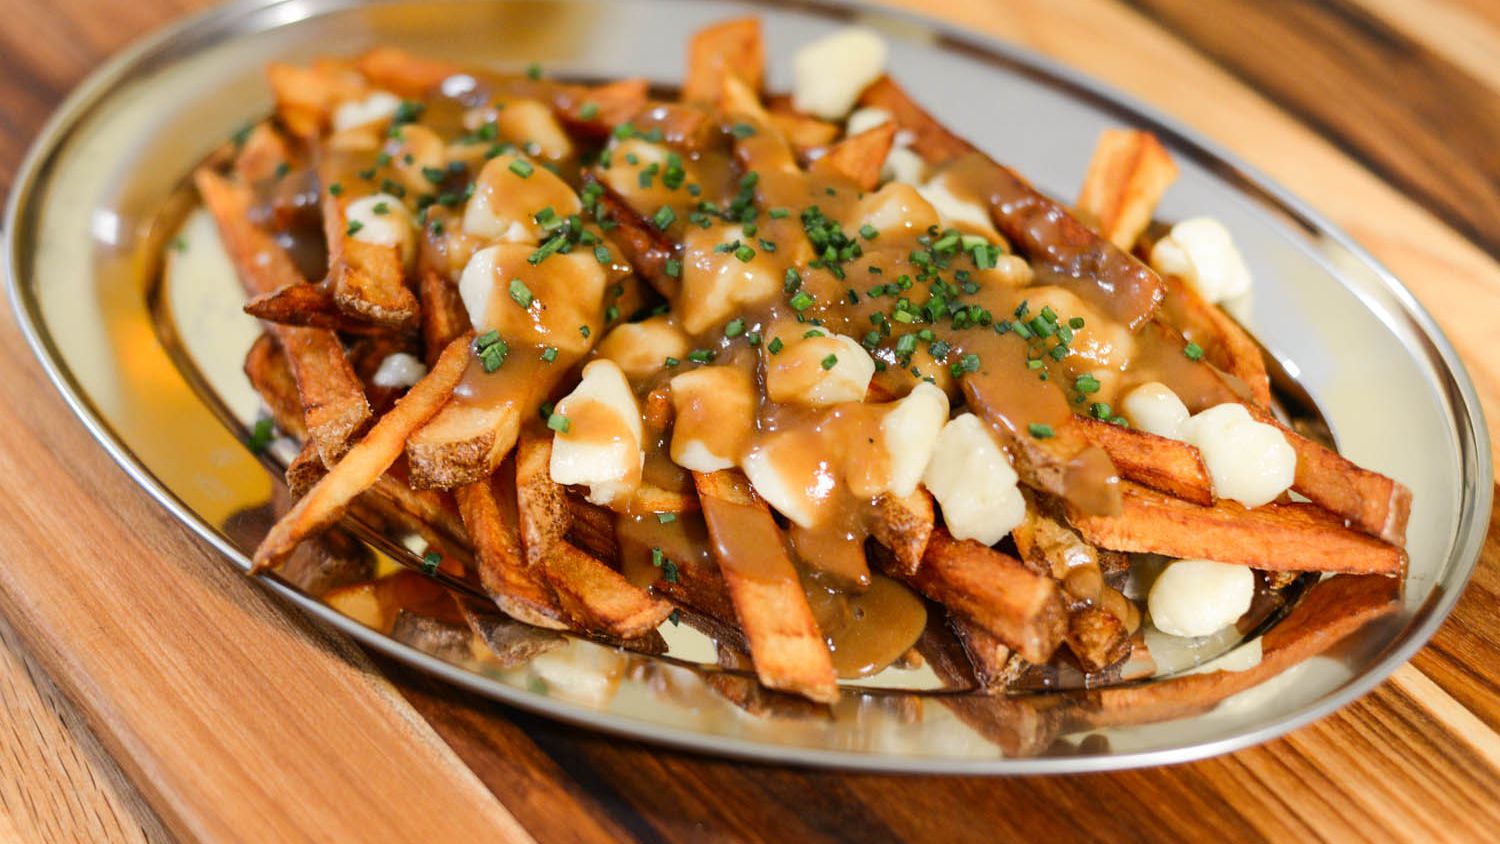 National dish of Canada